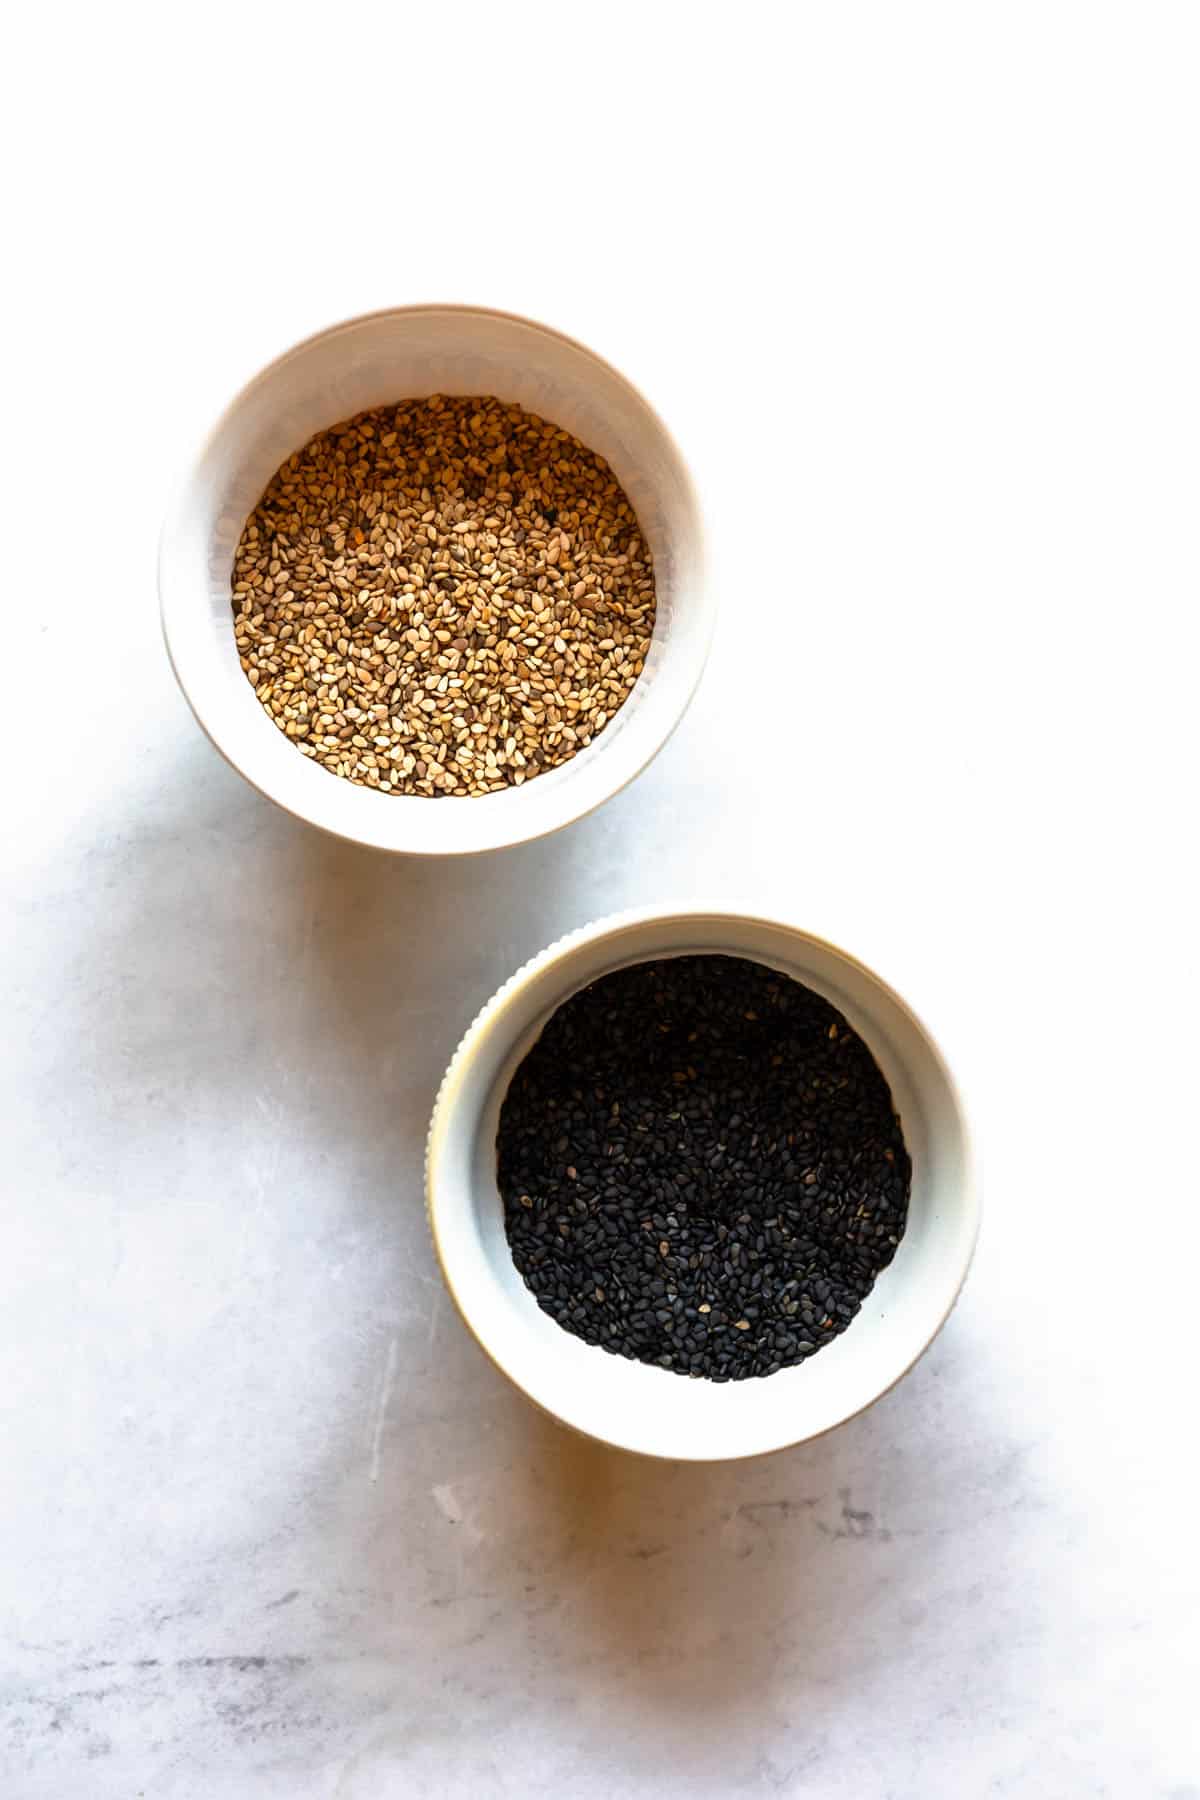 Two small bowls of sesame seeds, one with black seeds and one with white.